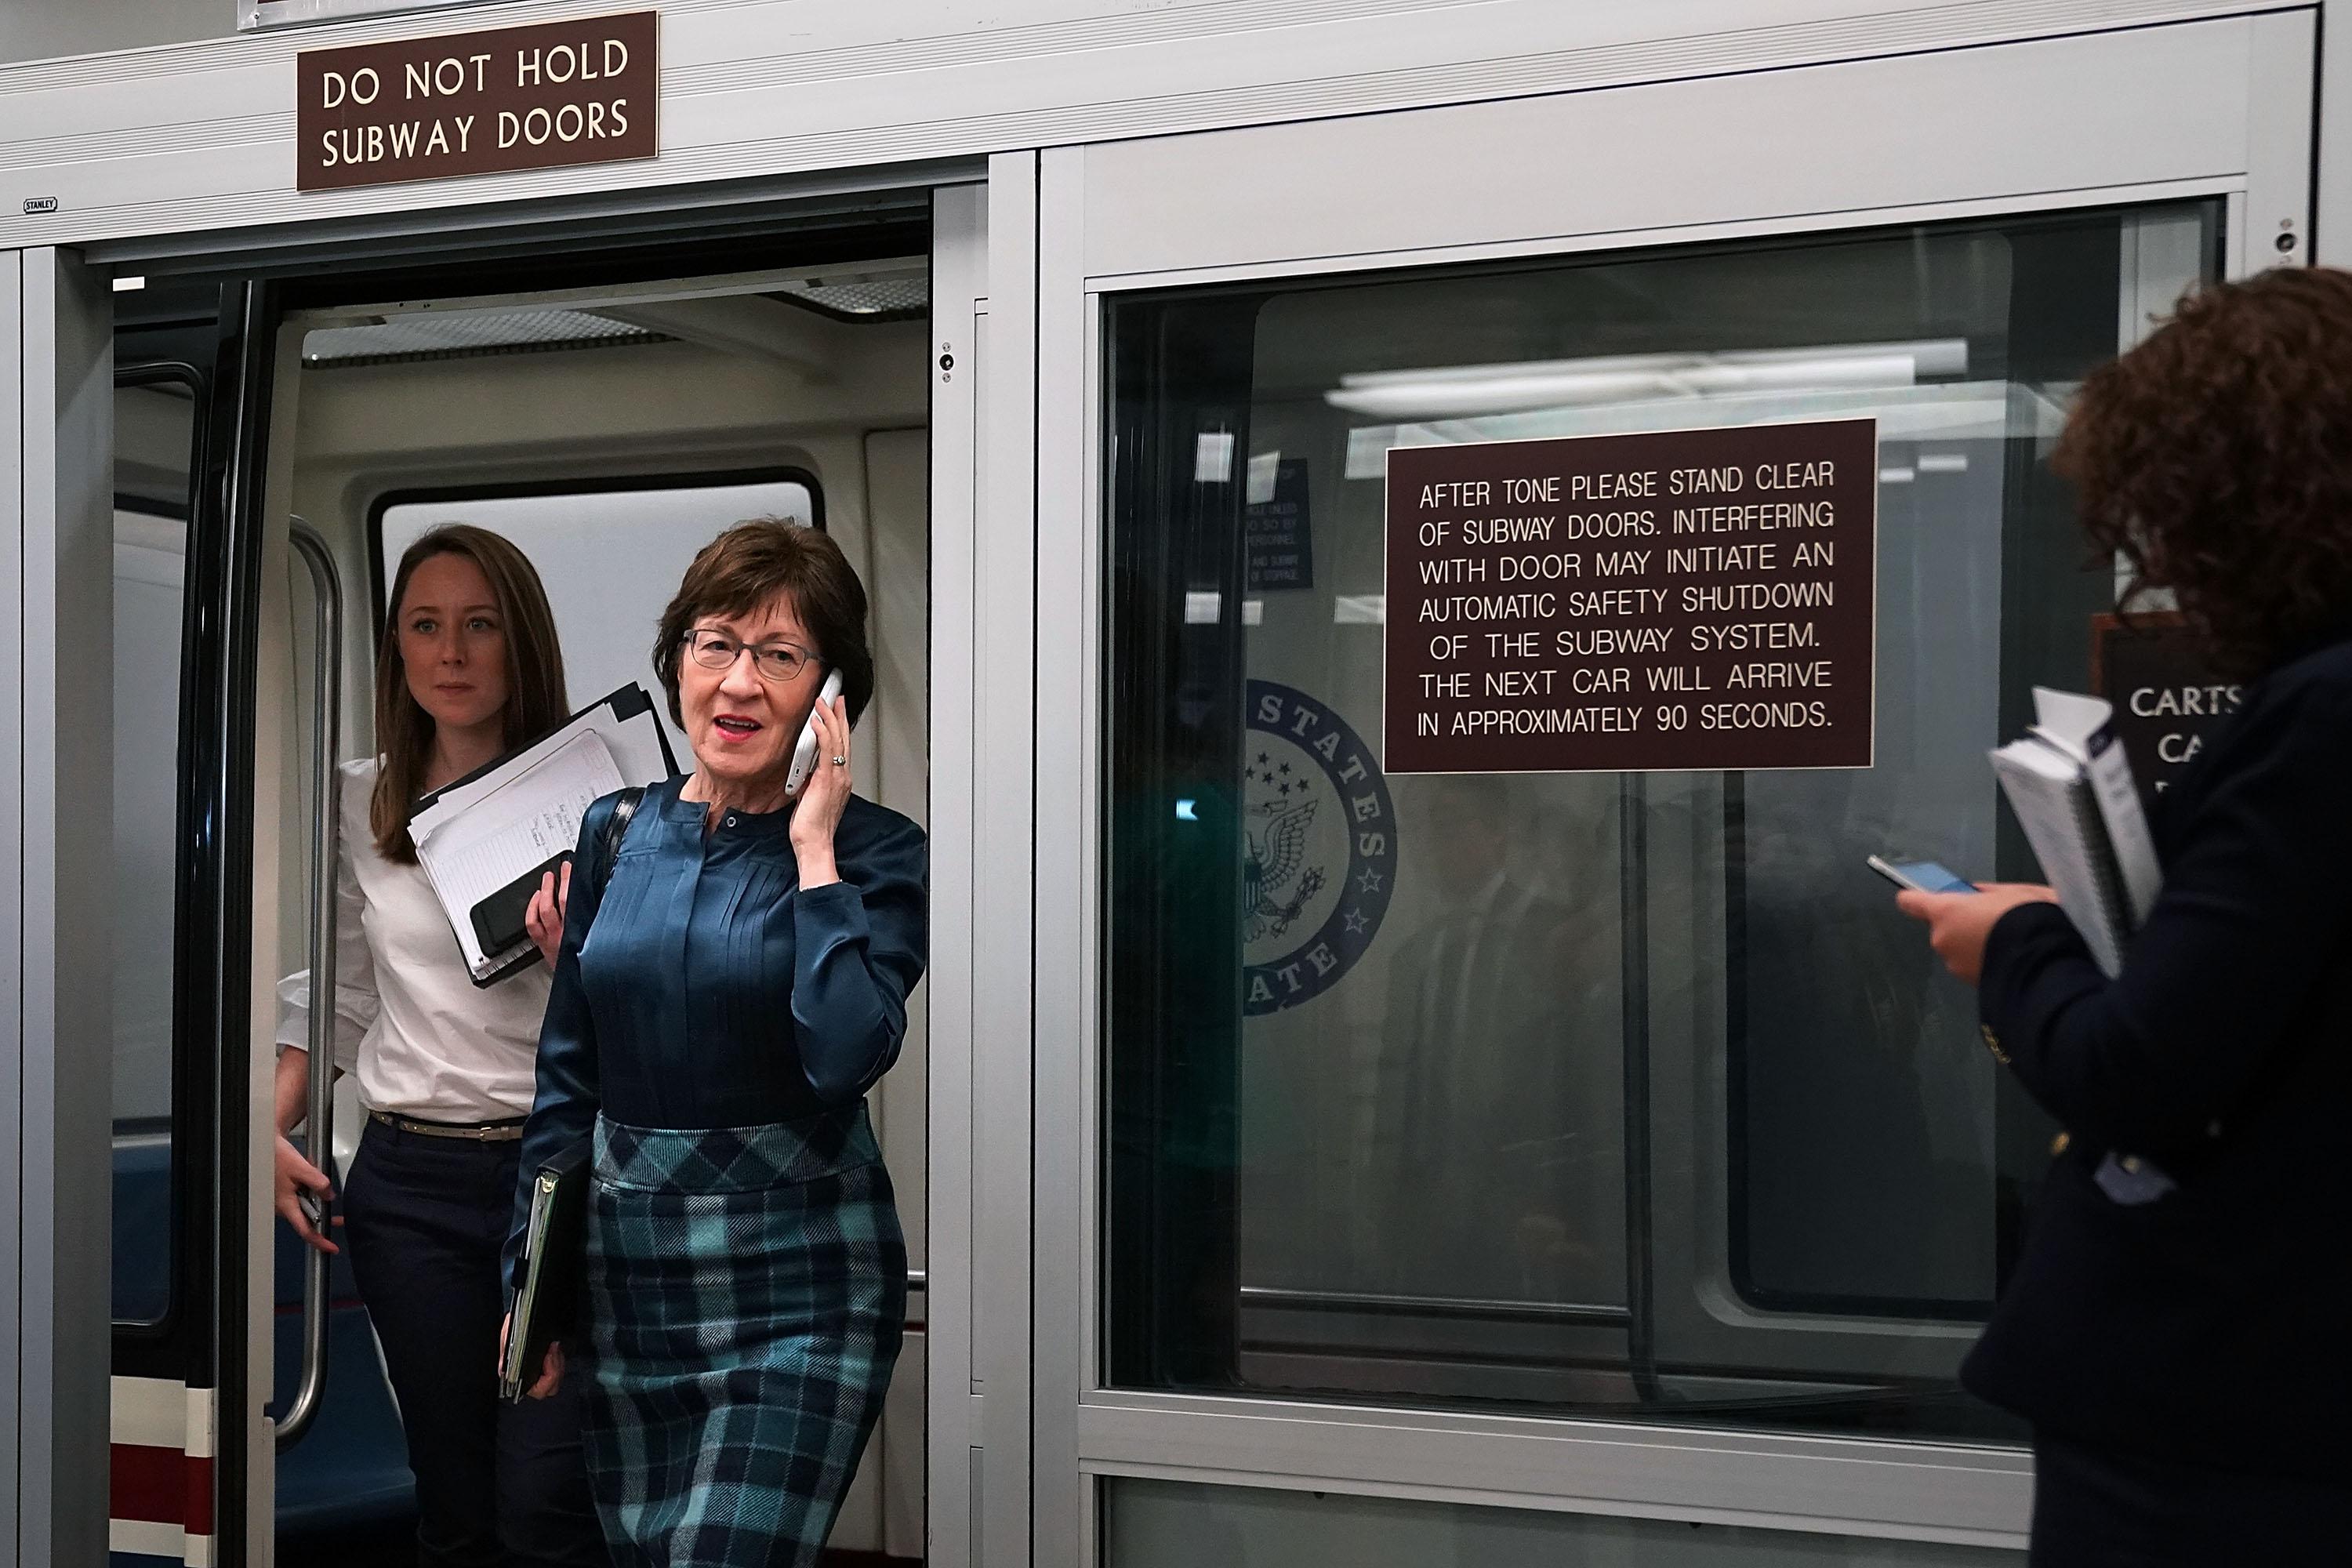 WASHINGTON, DC - NOVEMBER 14:  Sen. Susan Collins (R-ME) steps off the Senate subway as she heads for the GOP policy luncheon at the U.S. Capitol November 14, 2017 in Washington, DC. Senate Republicans are distancing themselves from Alabama GOP senate candidate Judge Roy Moore after five women have accused him of sexually inappropriate behavior and some in his own party have asked him to drop out of the race.  (Photo by Chip Somodevilla/Getty Images)